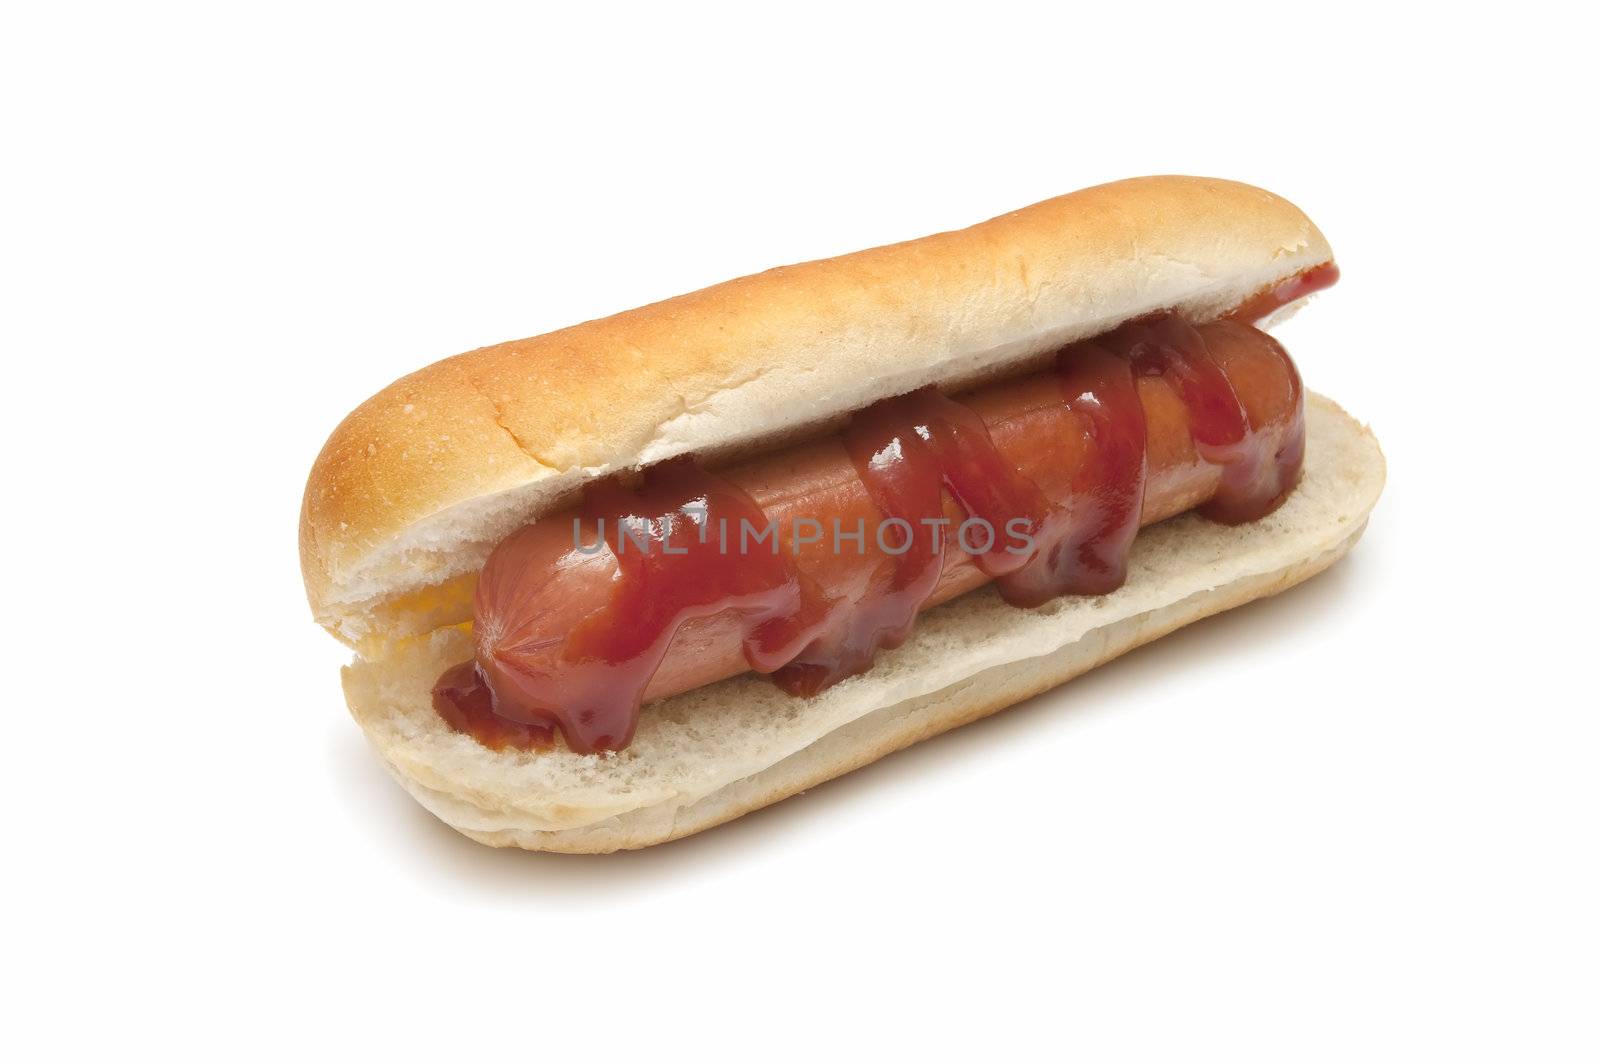 sausage sandwich with tomato isolated on white background